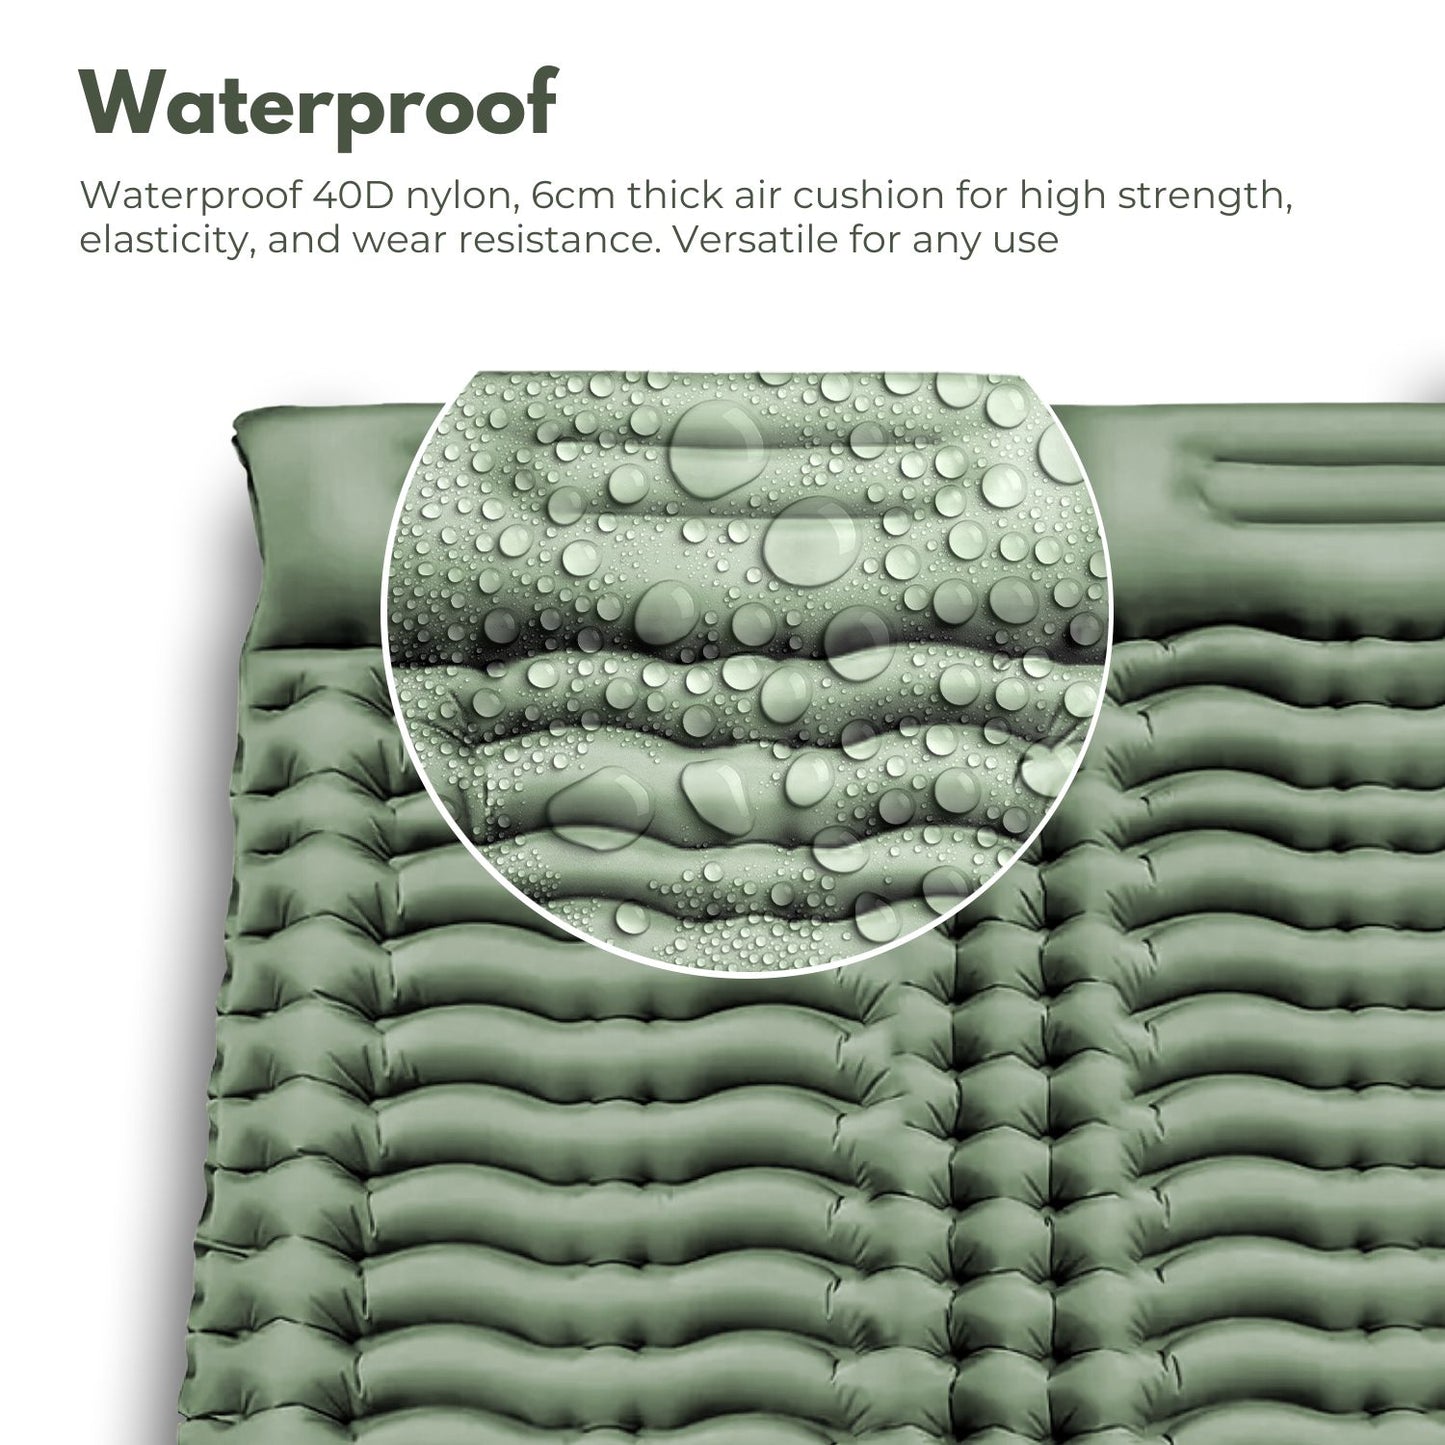 KILIROO Double Inflatable Camping Sleeping Pad with Pillow (Army Green)